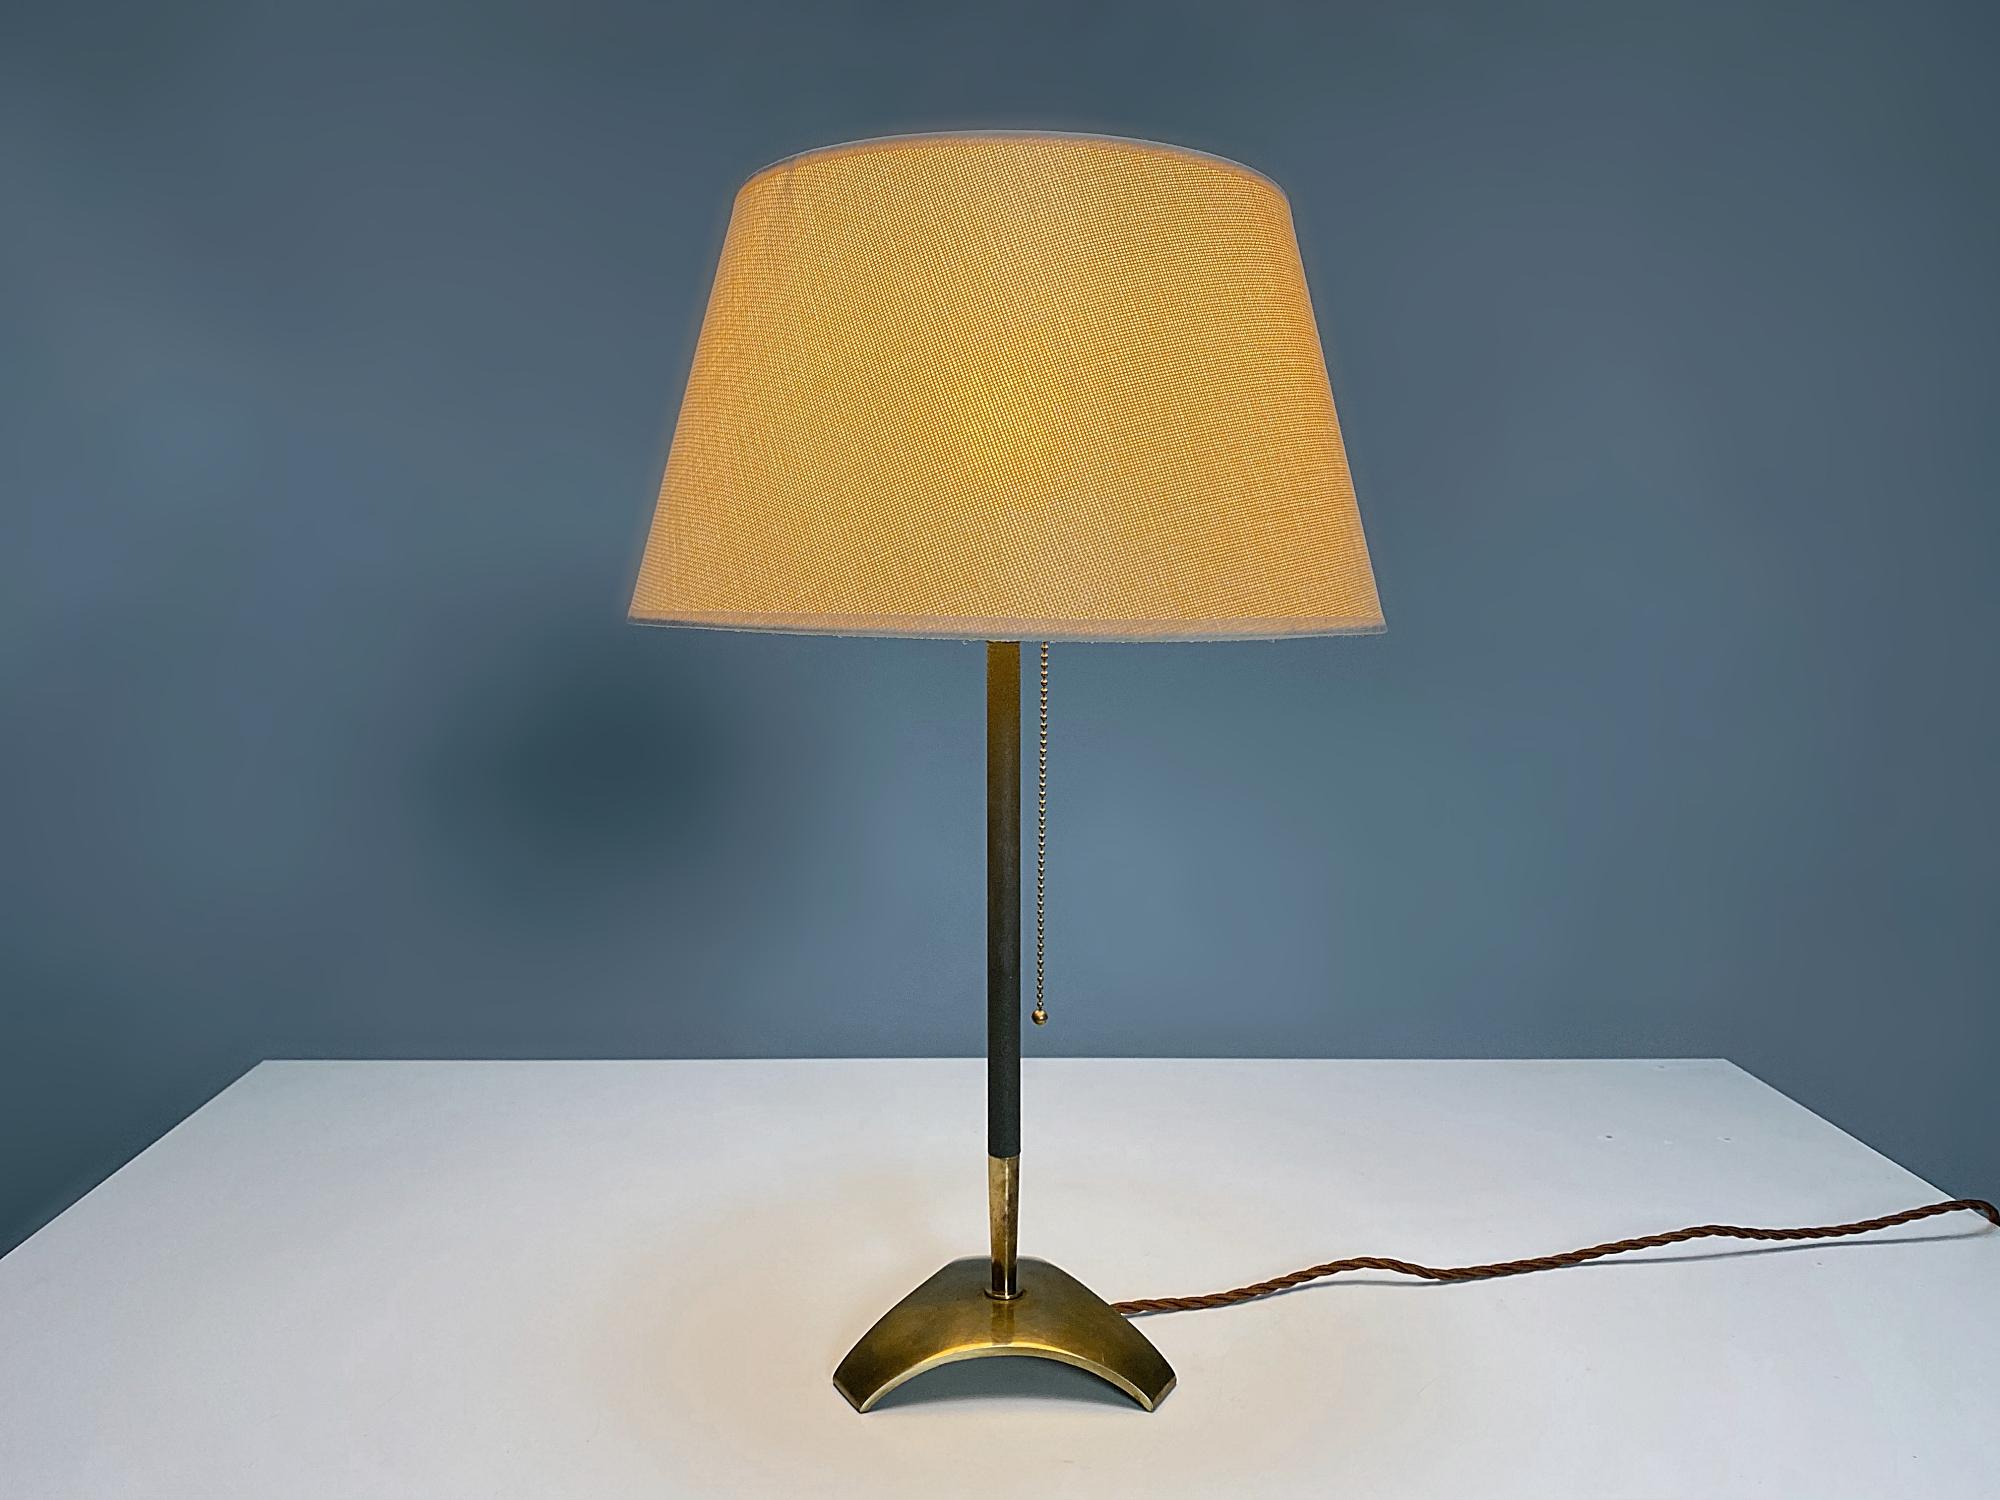 Beautiful Hagenauer Werkstätten brass table lamp manufactured in 1960s, Austria. The lamp is made of polished brass with dark grey-lacquered rod. The lamp provides a smooth and wonderful light. The lamp is in very good original condition, fully